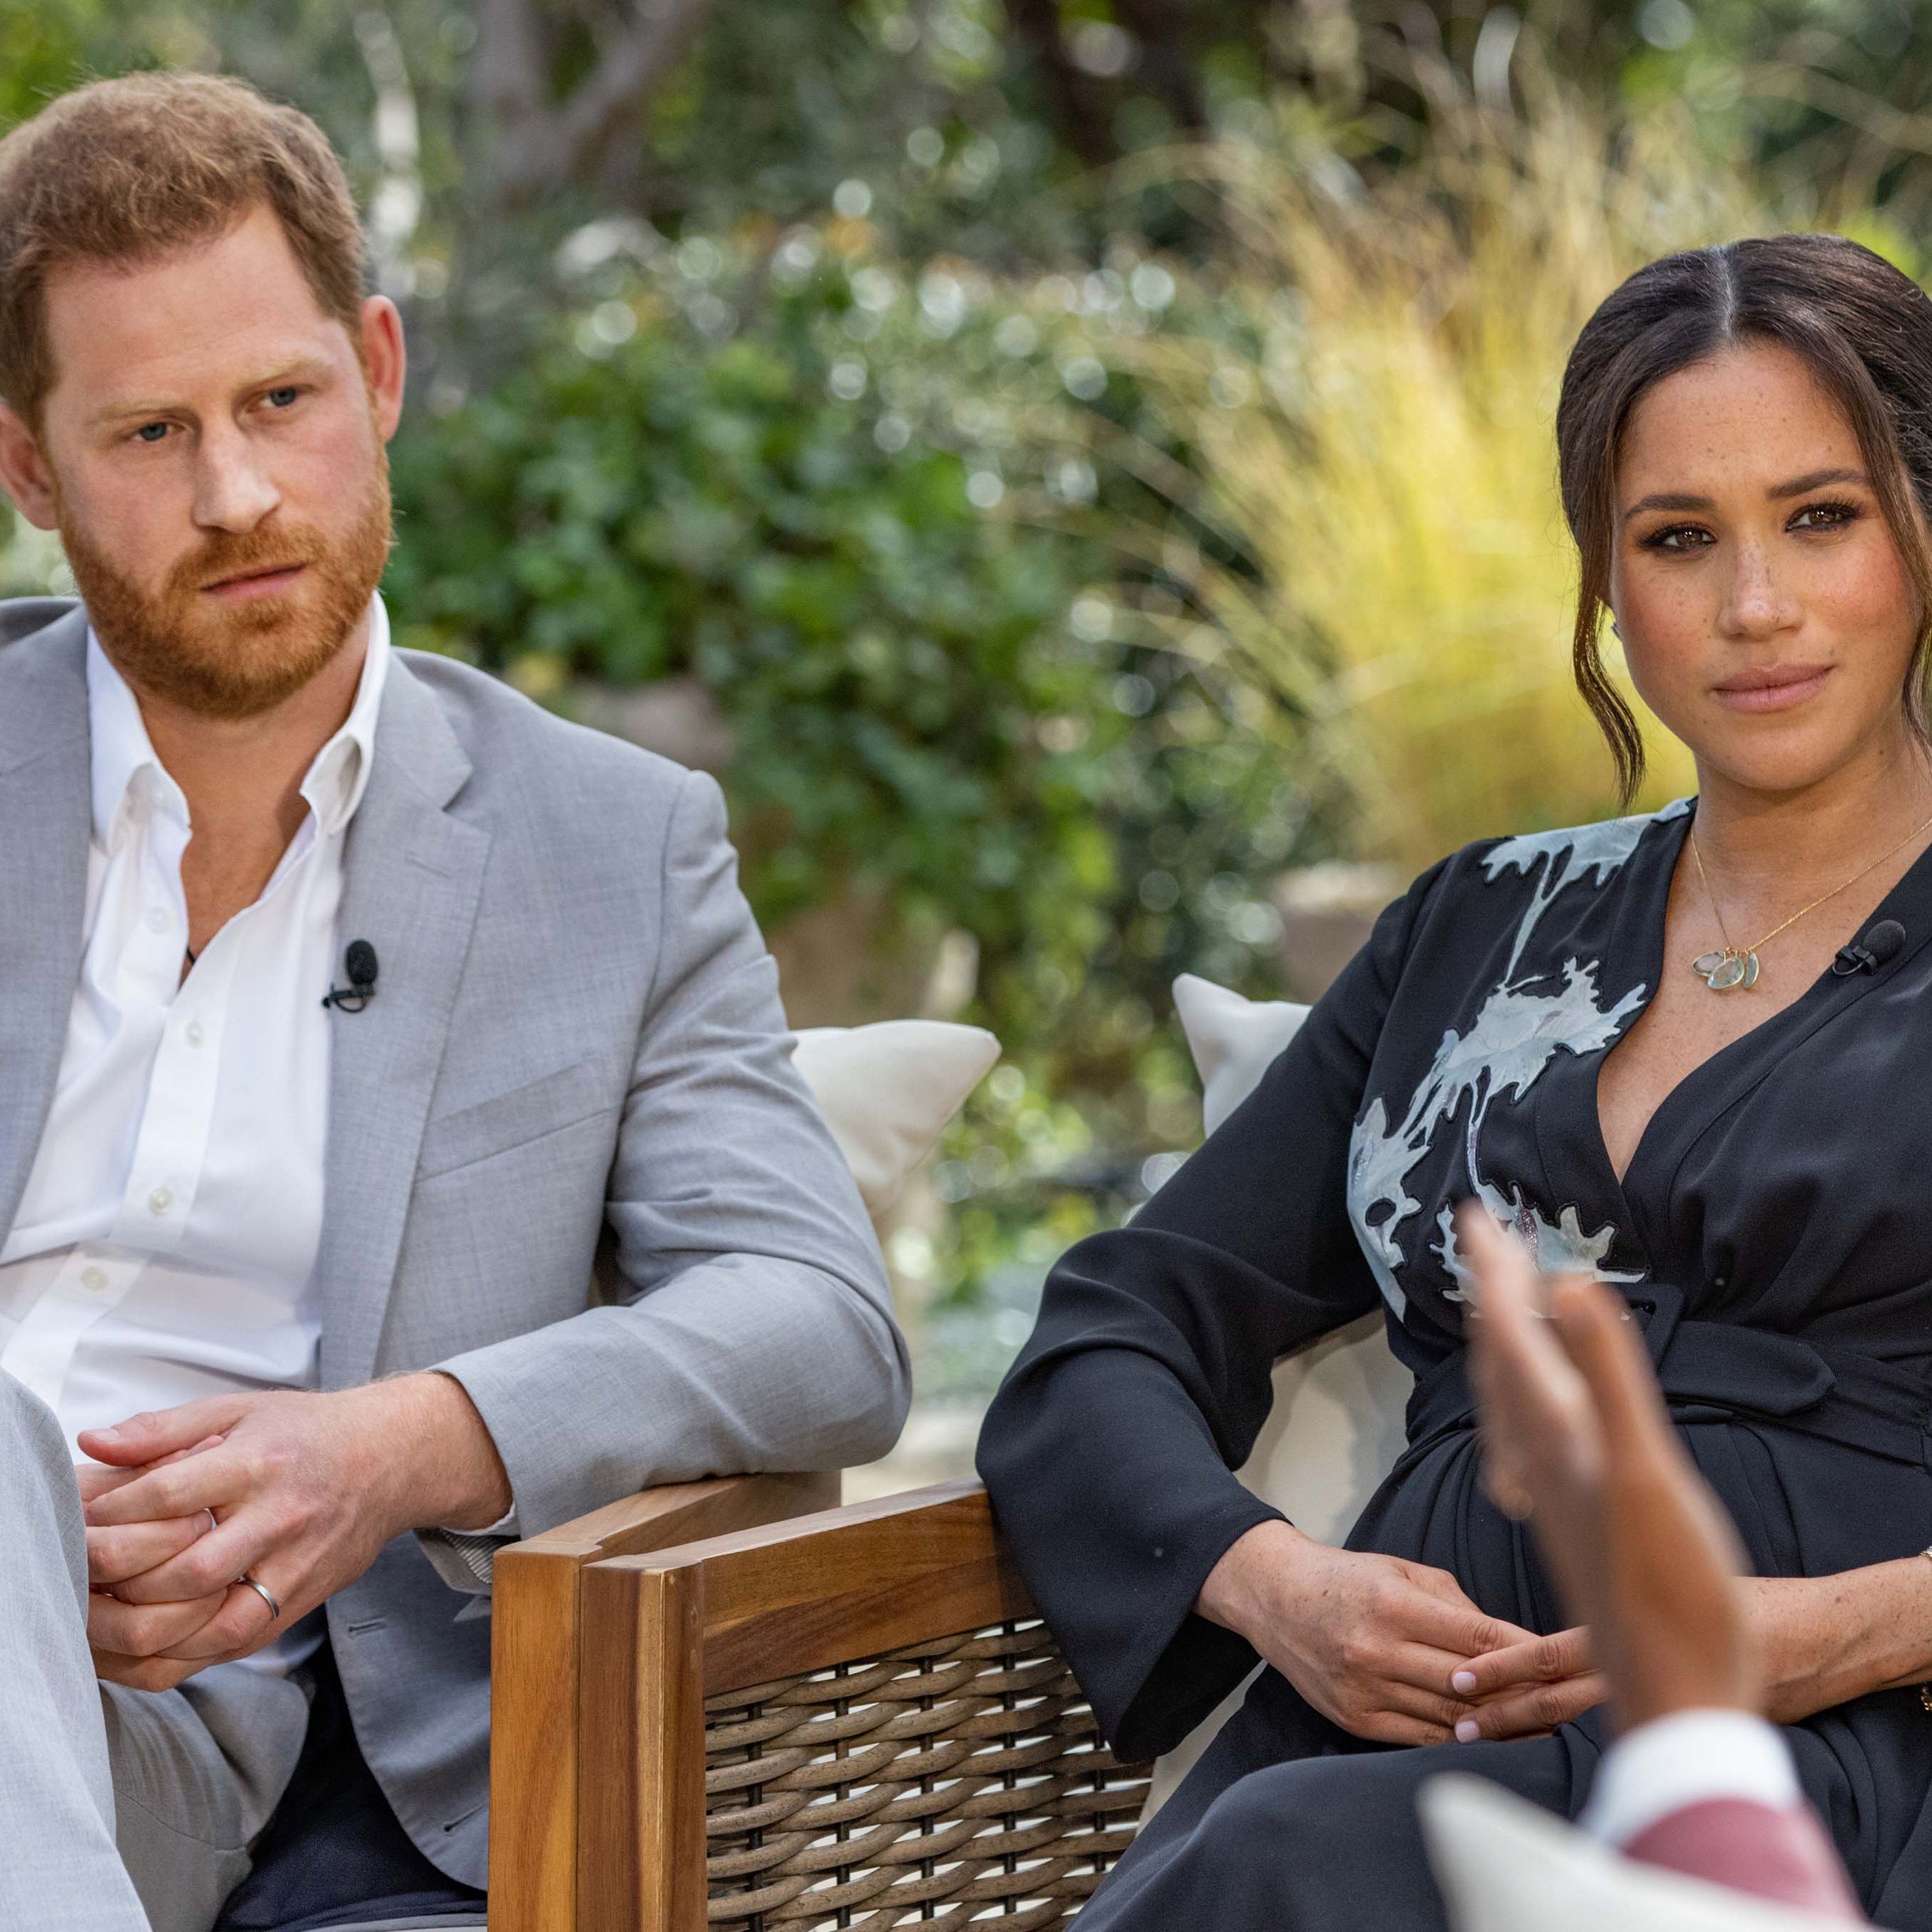 Prince William and Kate Middleton Shaped the Royal Family's Response to the Sussexes' Oprah Interview